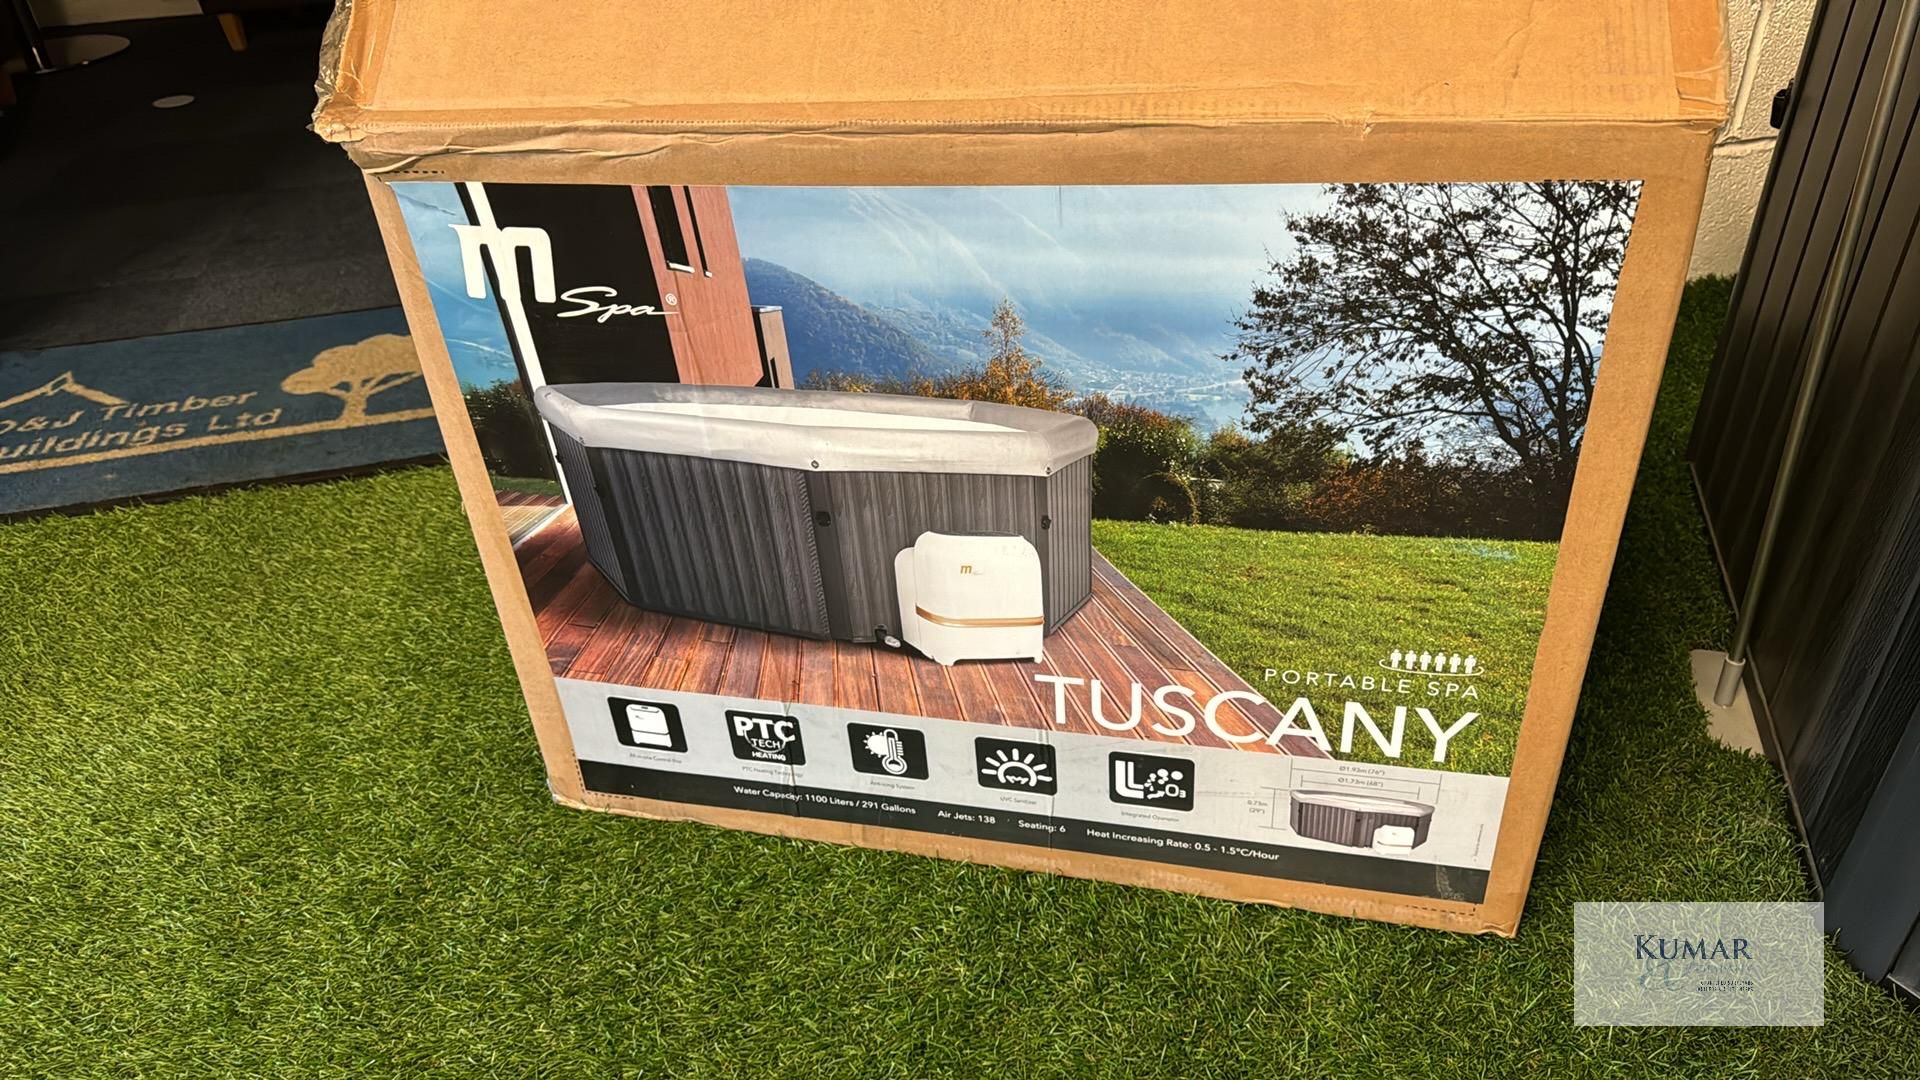 M Spa Tuscany Frame Series P- TU069 6 Bather Inflatable Spa Display Model Never Been Used with Box - Image 4 of 15